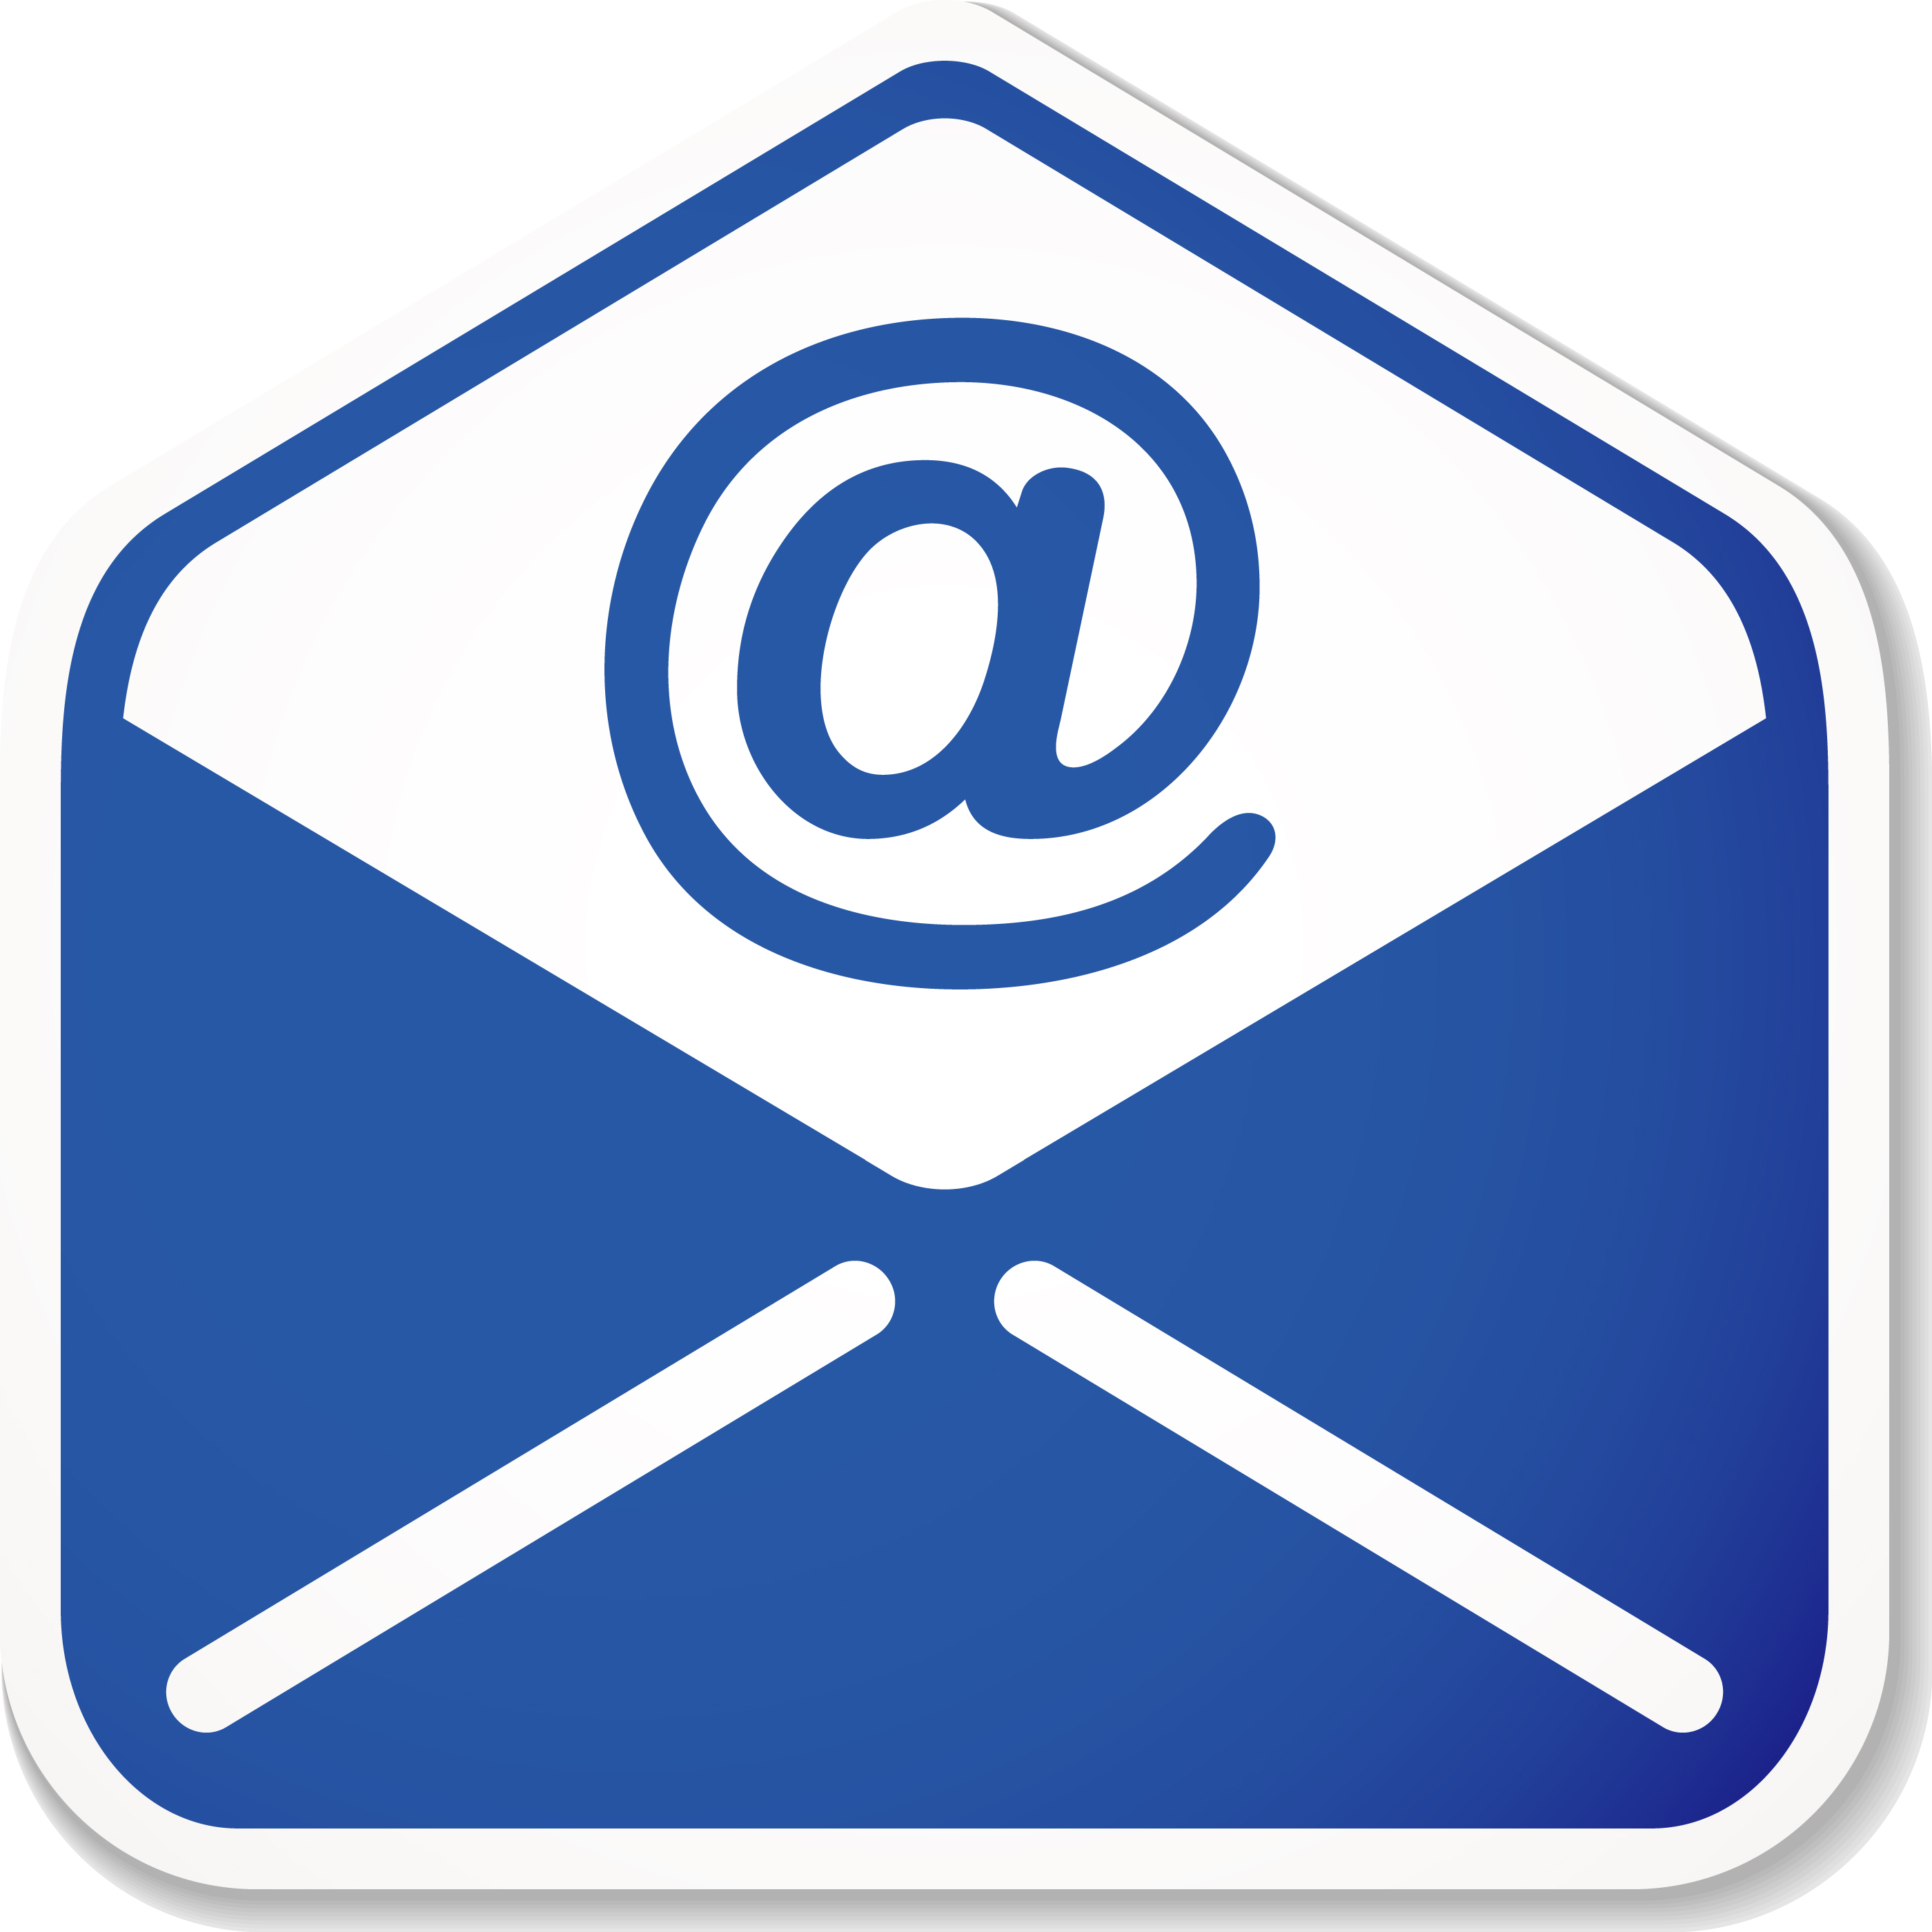 email logo.jpg | The Well Project